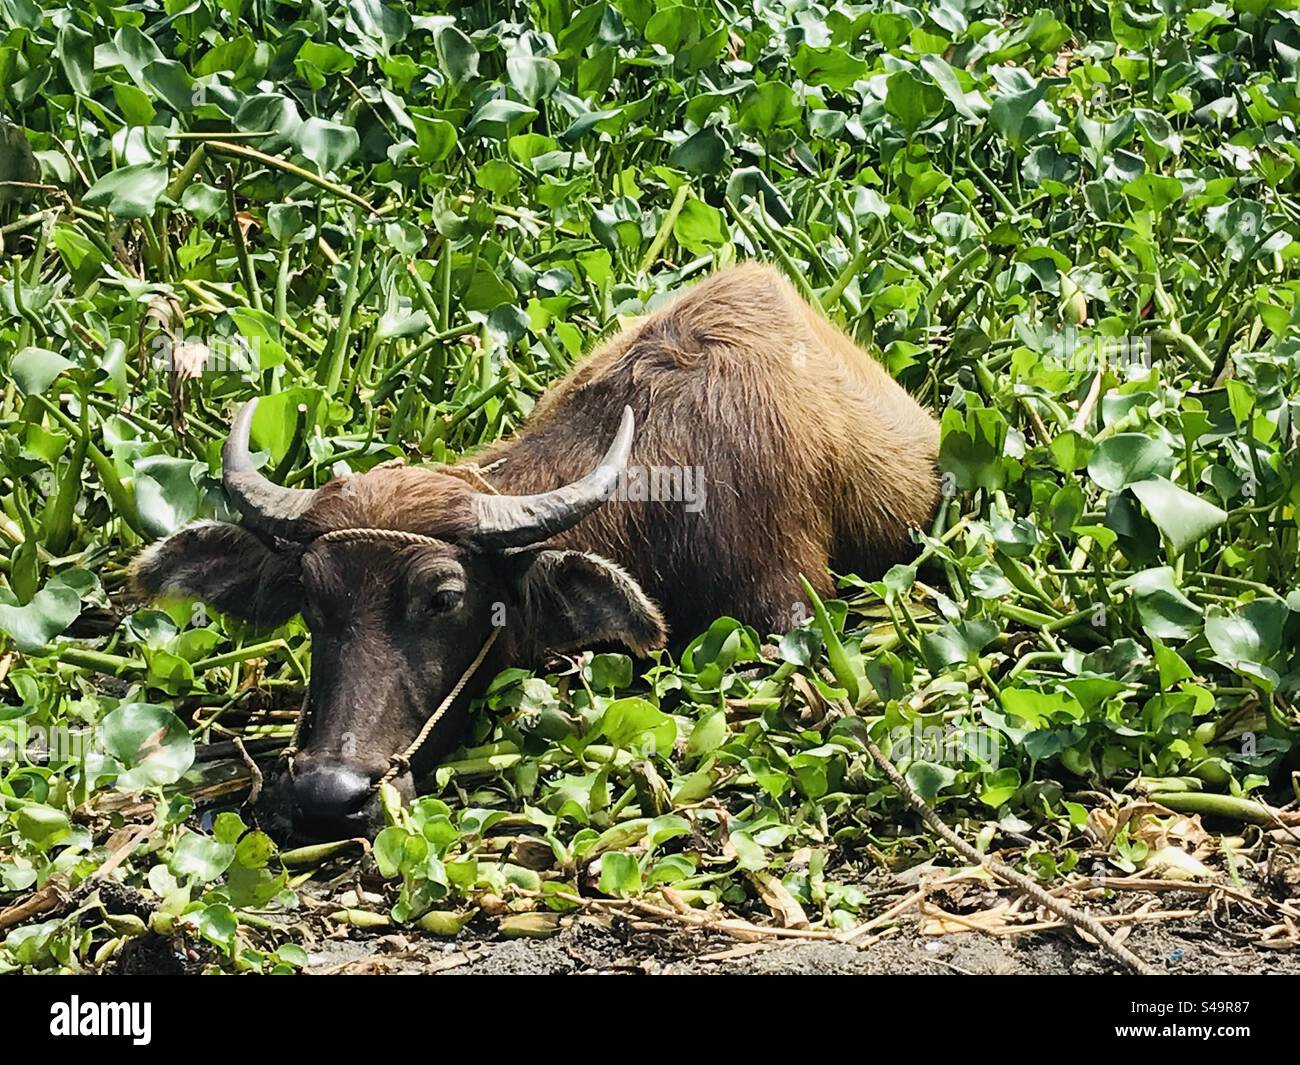 A Philippine water buffalo chills and submerged himself on a swamp of greens after a long day of working in the farm. A beautiful sight to behold. Captivating rural sight. Countryside charm. Stock Photo